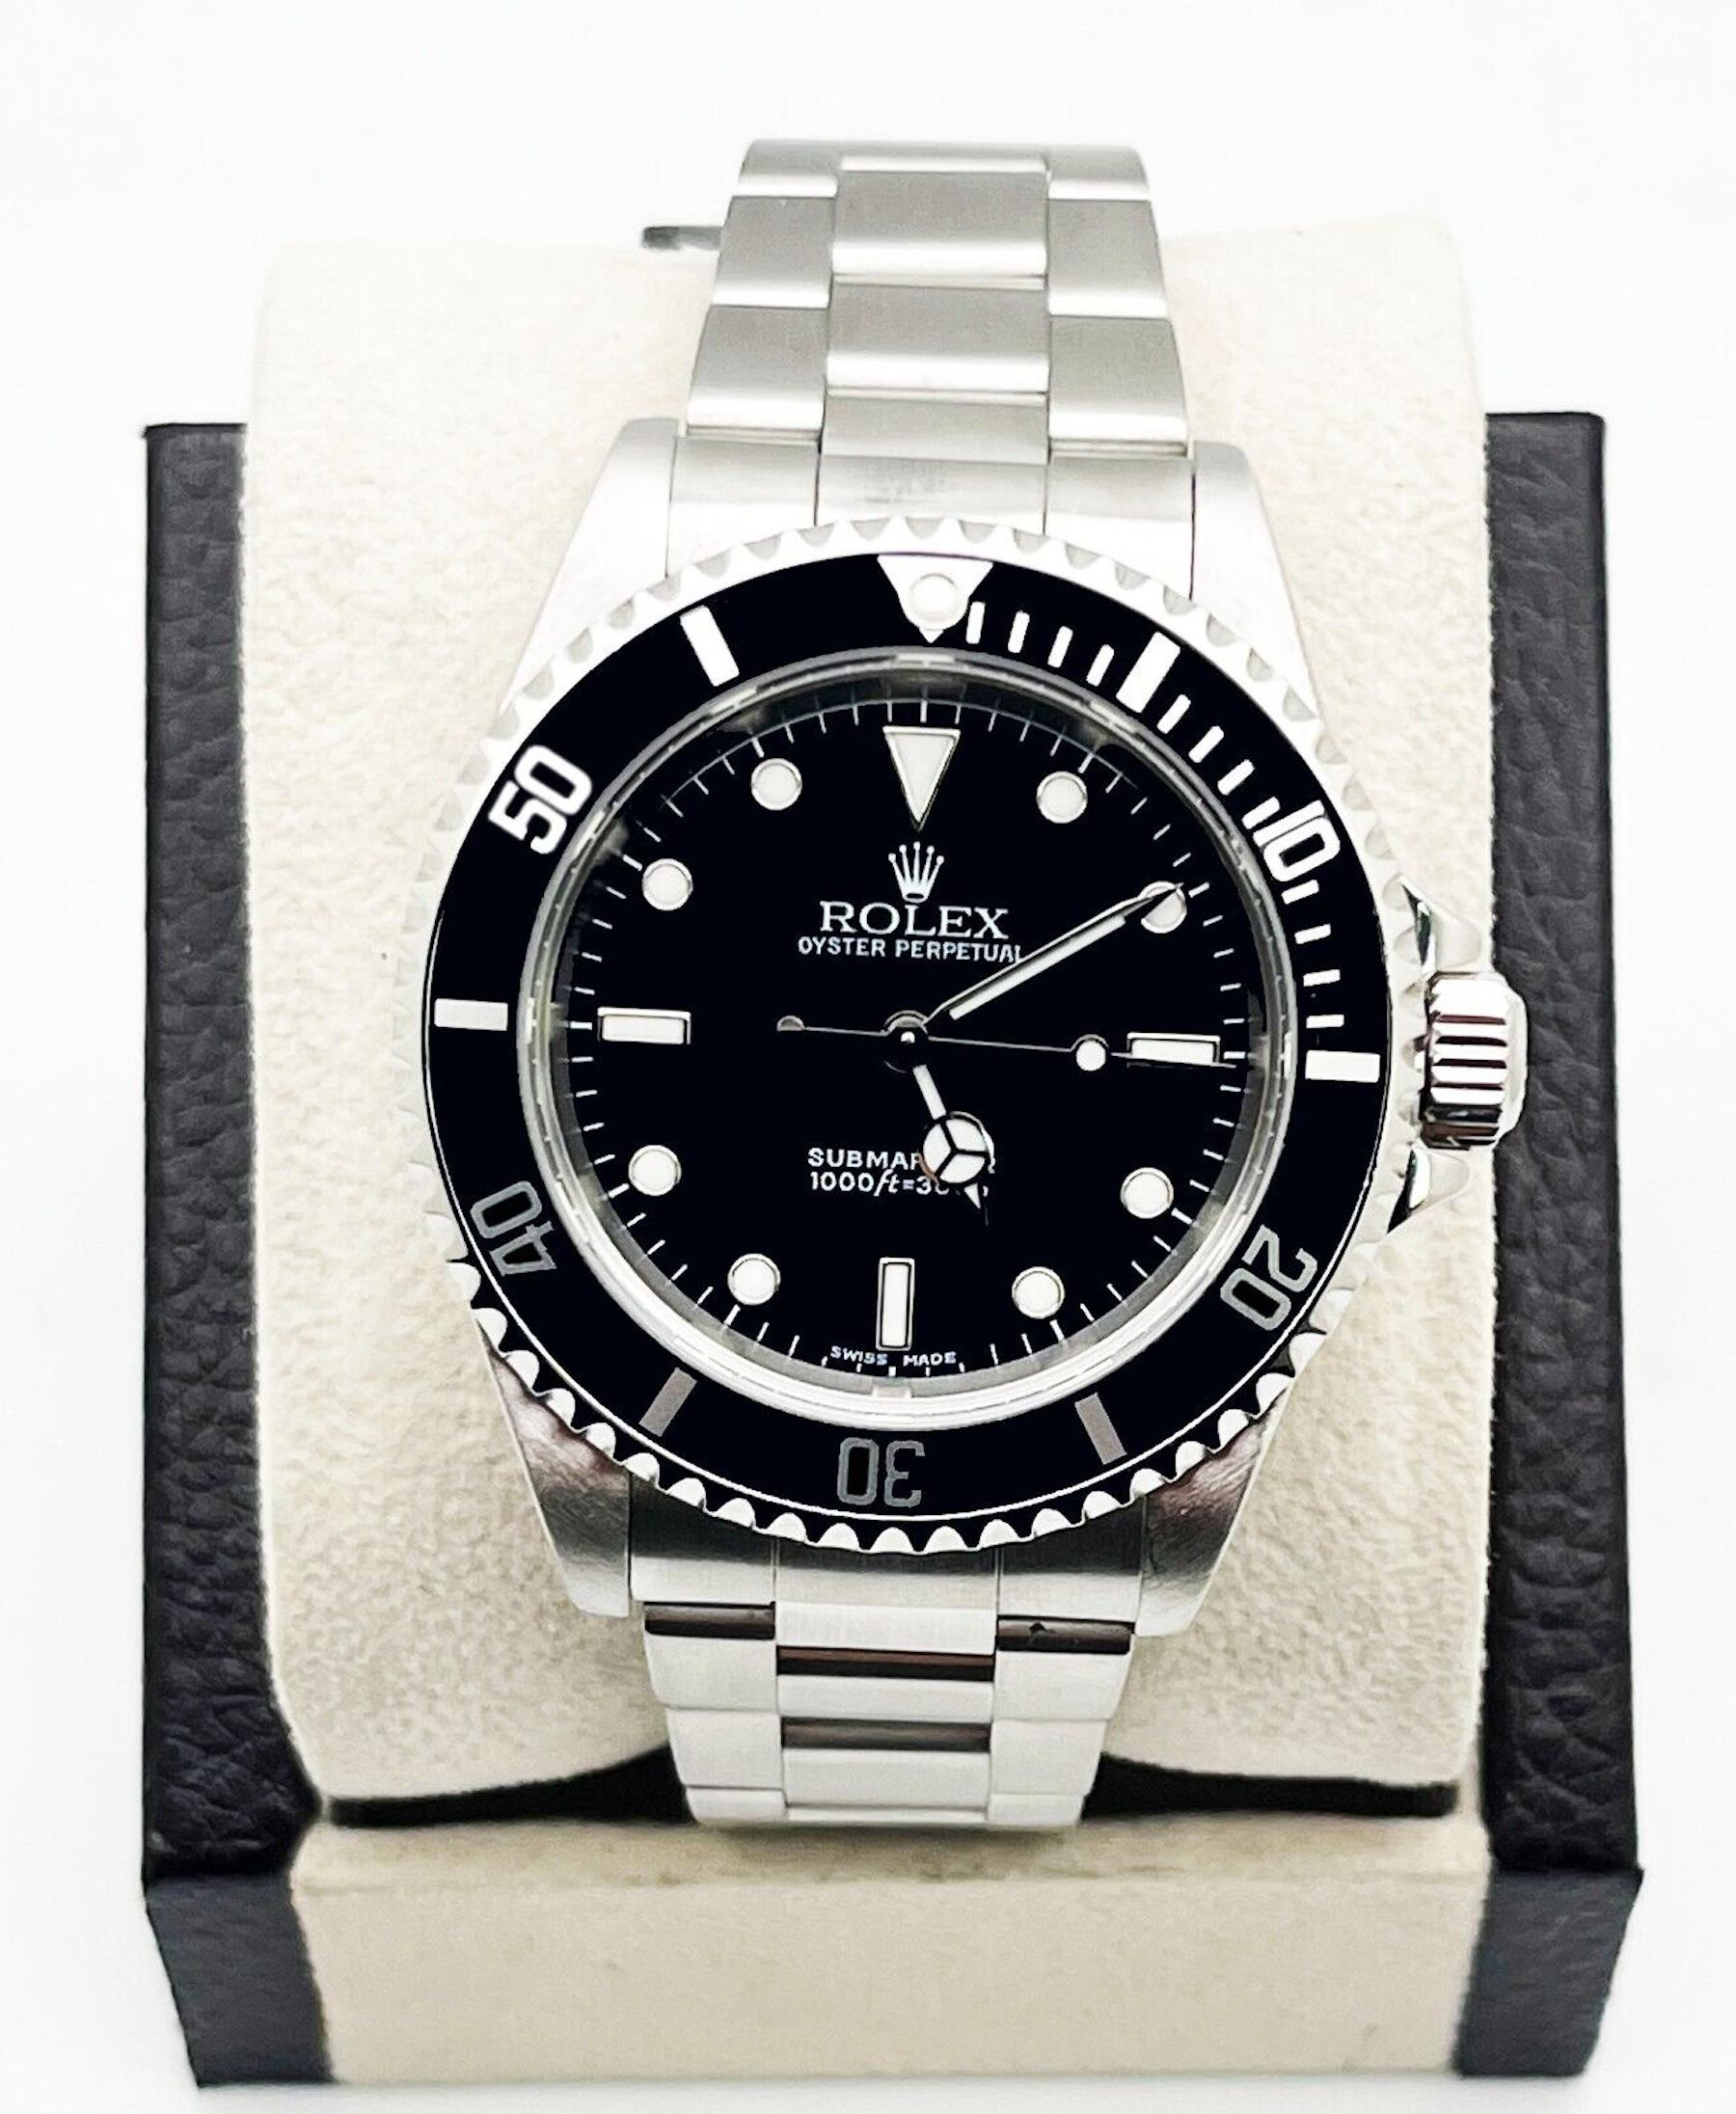 Rolex Submariner 14060 Black Dial Stainless Steel Box Paper 2005 In Excellent Condition For Sale In San Diego, CA